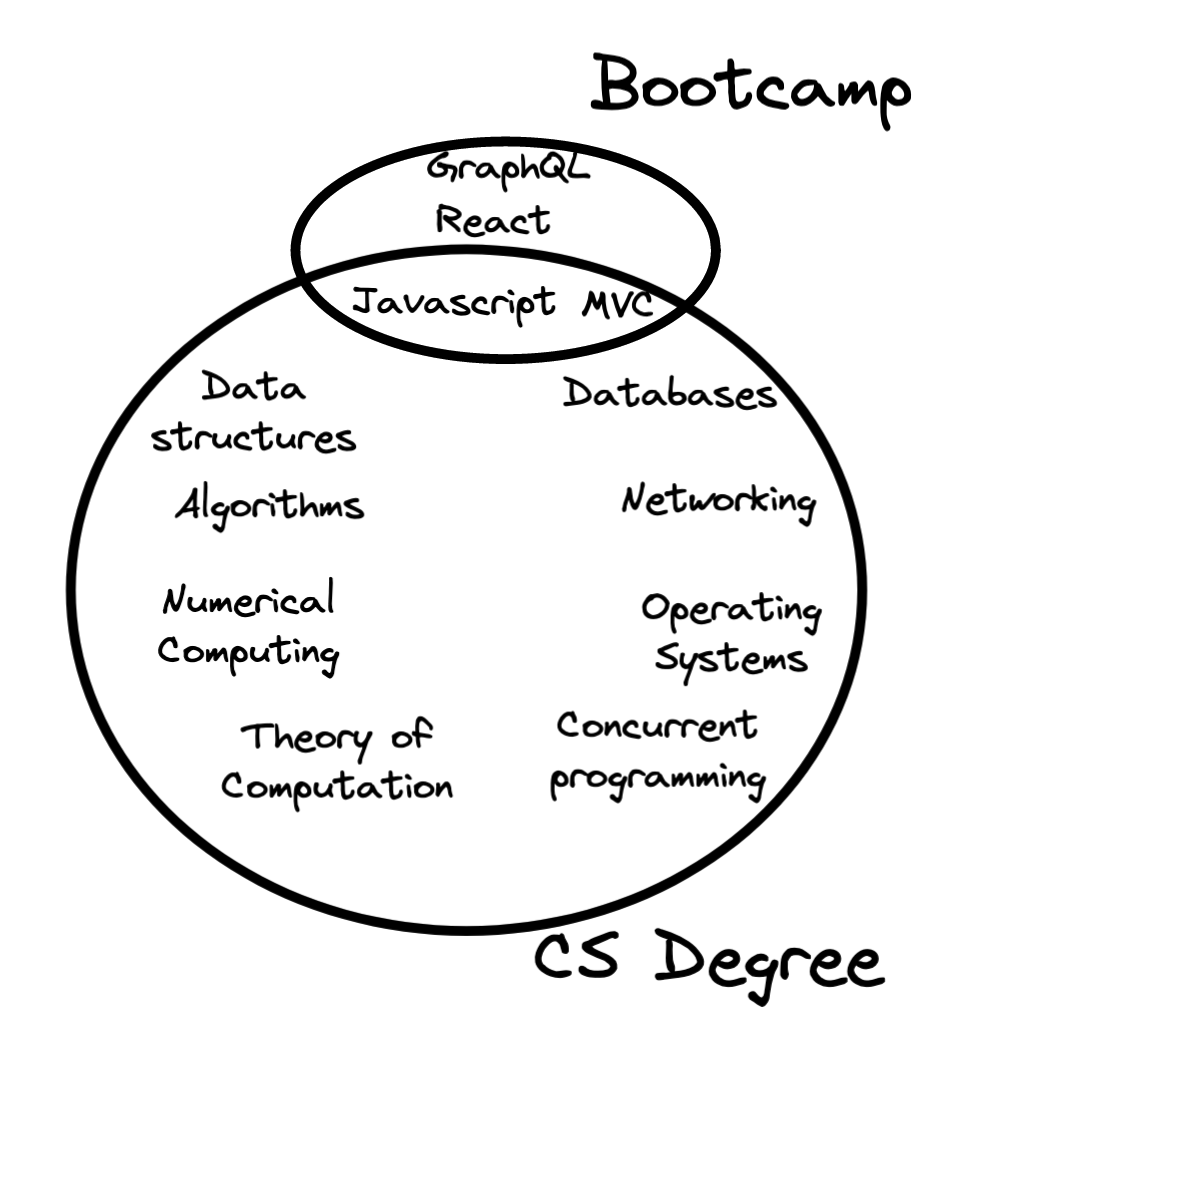 A venn diagram with a large circle depicting the CS degree. It contains many foundatinal skills like Theory of Computation. Then a smaller circle labelled 'Bootcamp' overlaps slightly. It teaches React, GraphQL, and overlaps with the CS Degree in the Javascript and MVC skills.